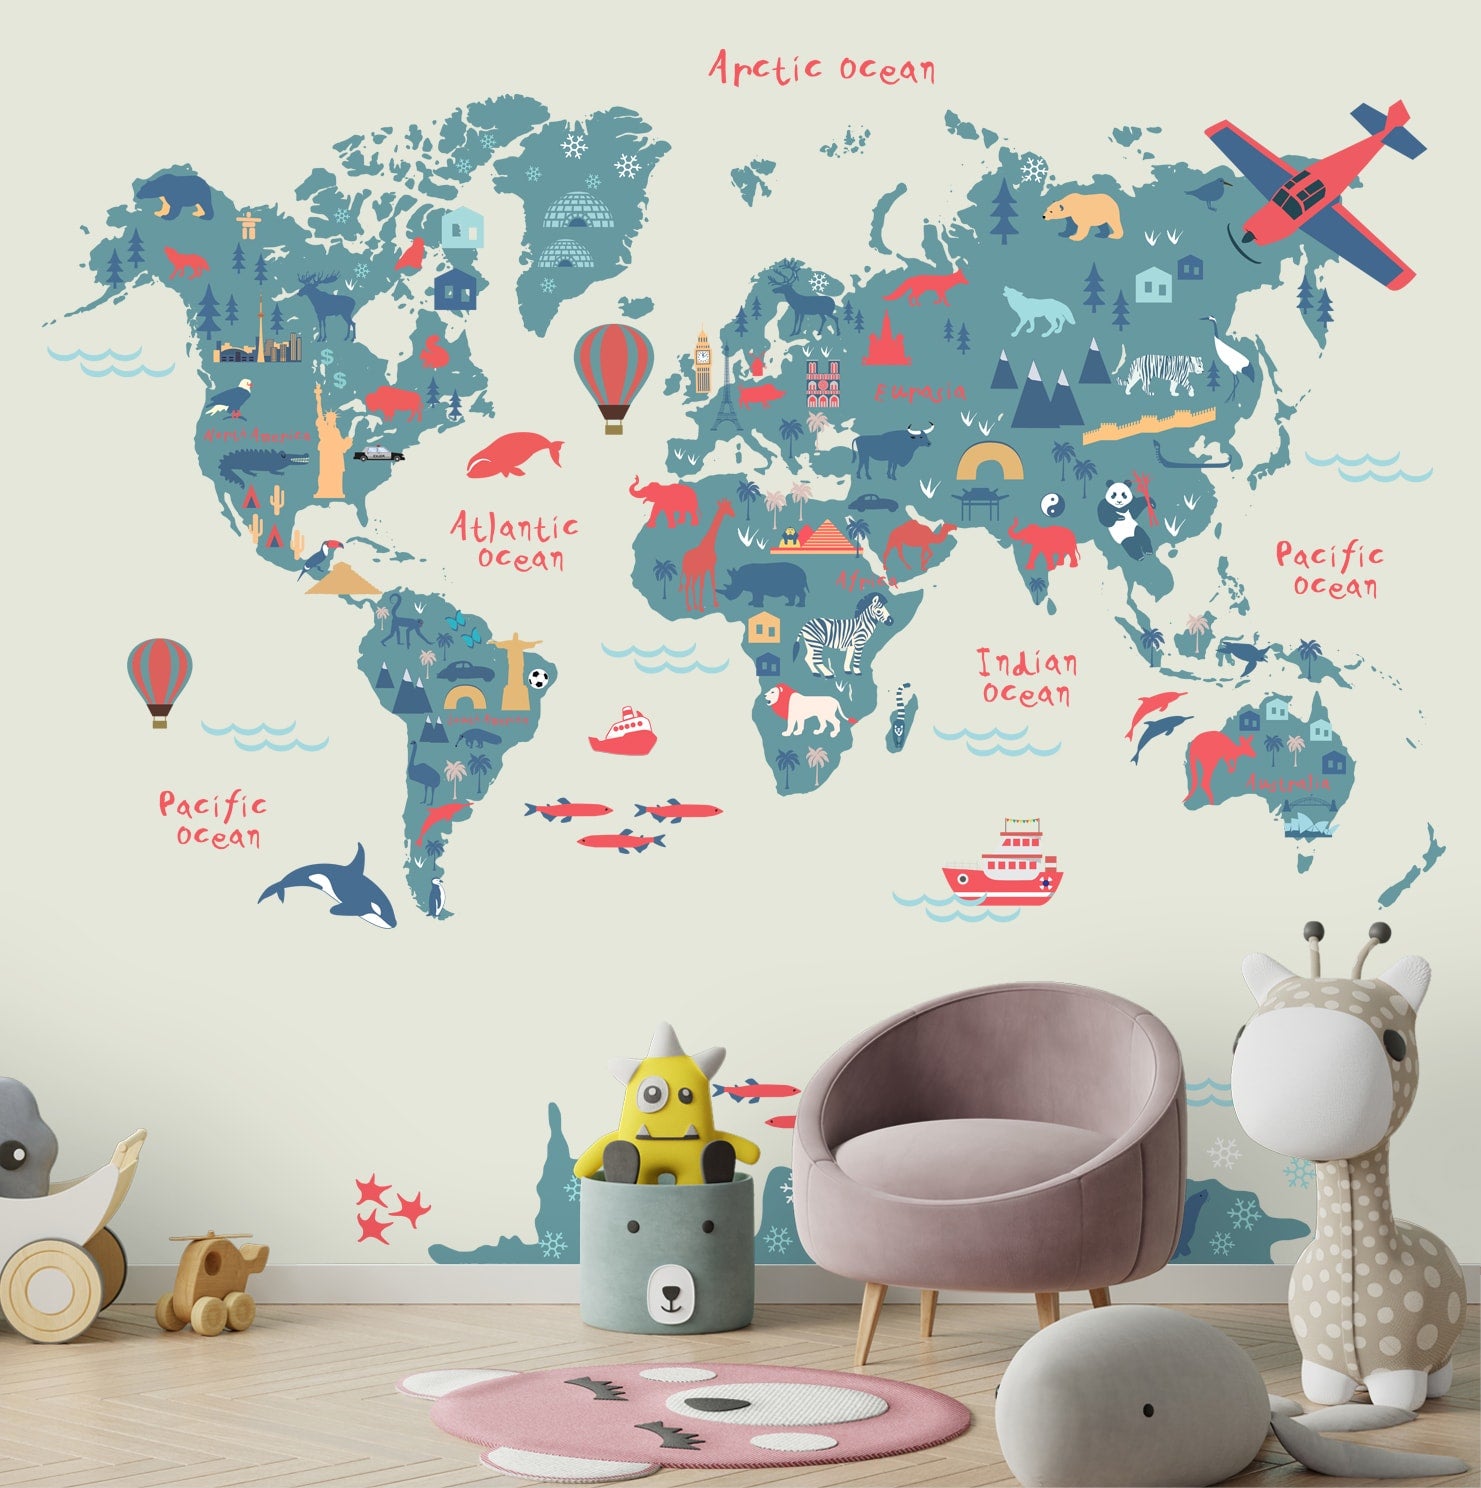 Beautiful Silhouette World Map Wallpaper Design for Kids Room, Made to Size